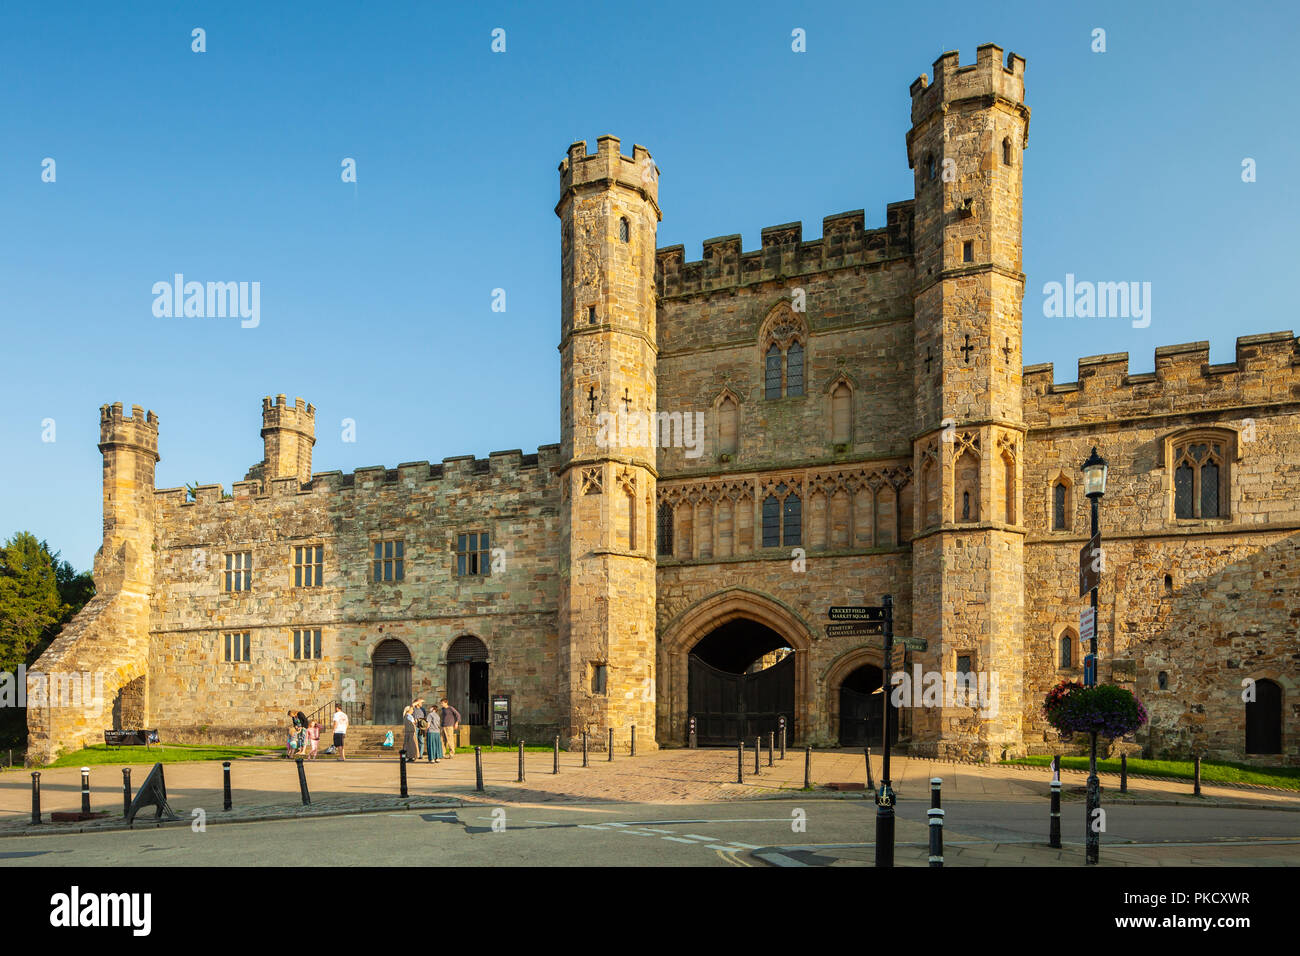 Summer evening at Battle Abbey in East Sussex, England. Stock Photo